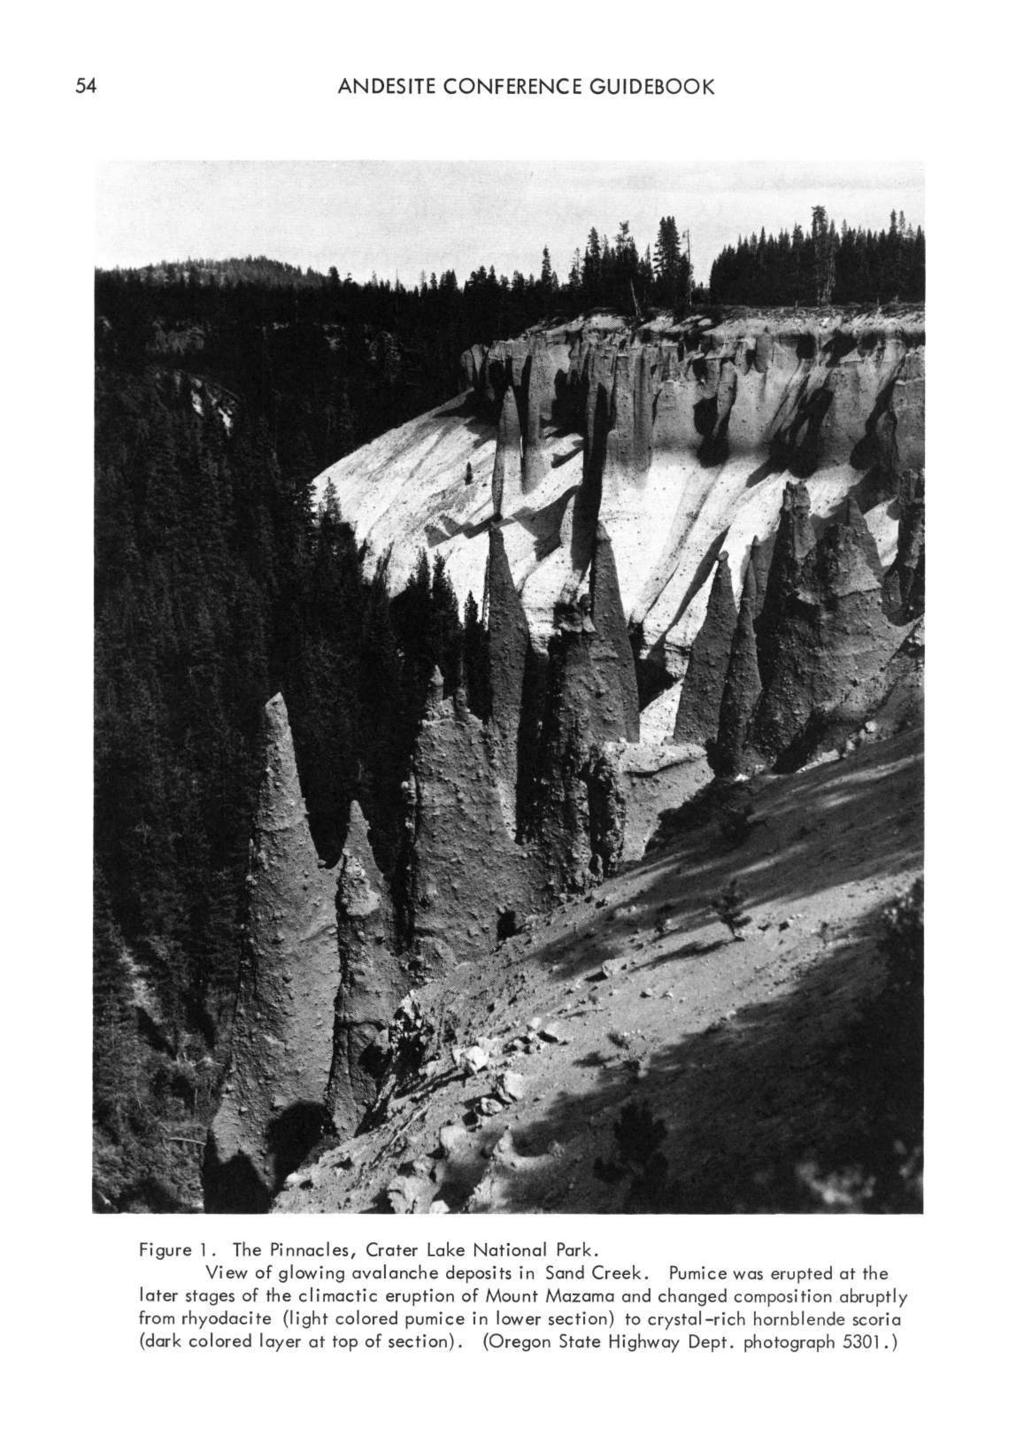 54 ANDESITE CONFERENCE GUIDEBOOK Figure 1. The Pinnacles, Crater Lake National Park. View of glowing avalanche deposits in Sand Creek.